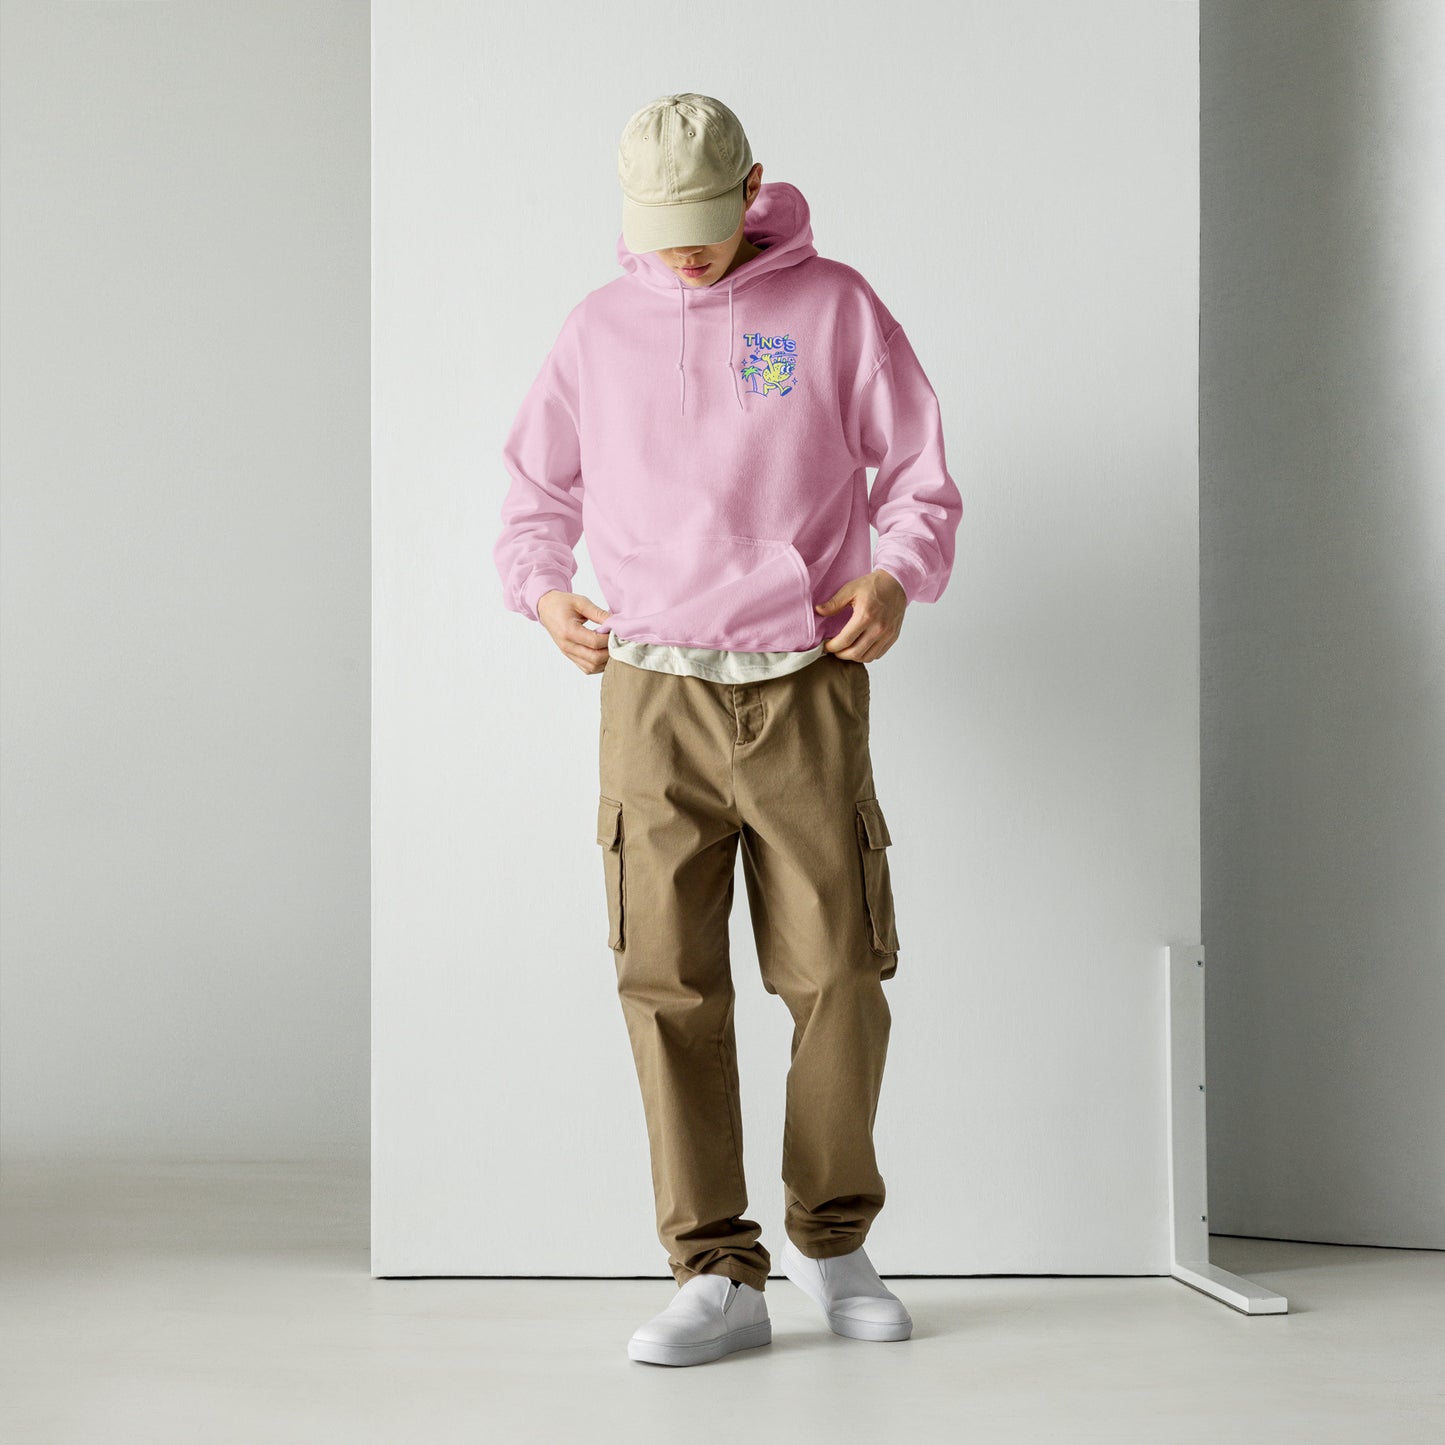 Male model wearing Ting's pink unisex hoodie with Ting's logo on front